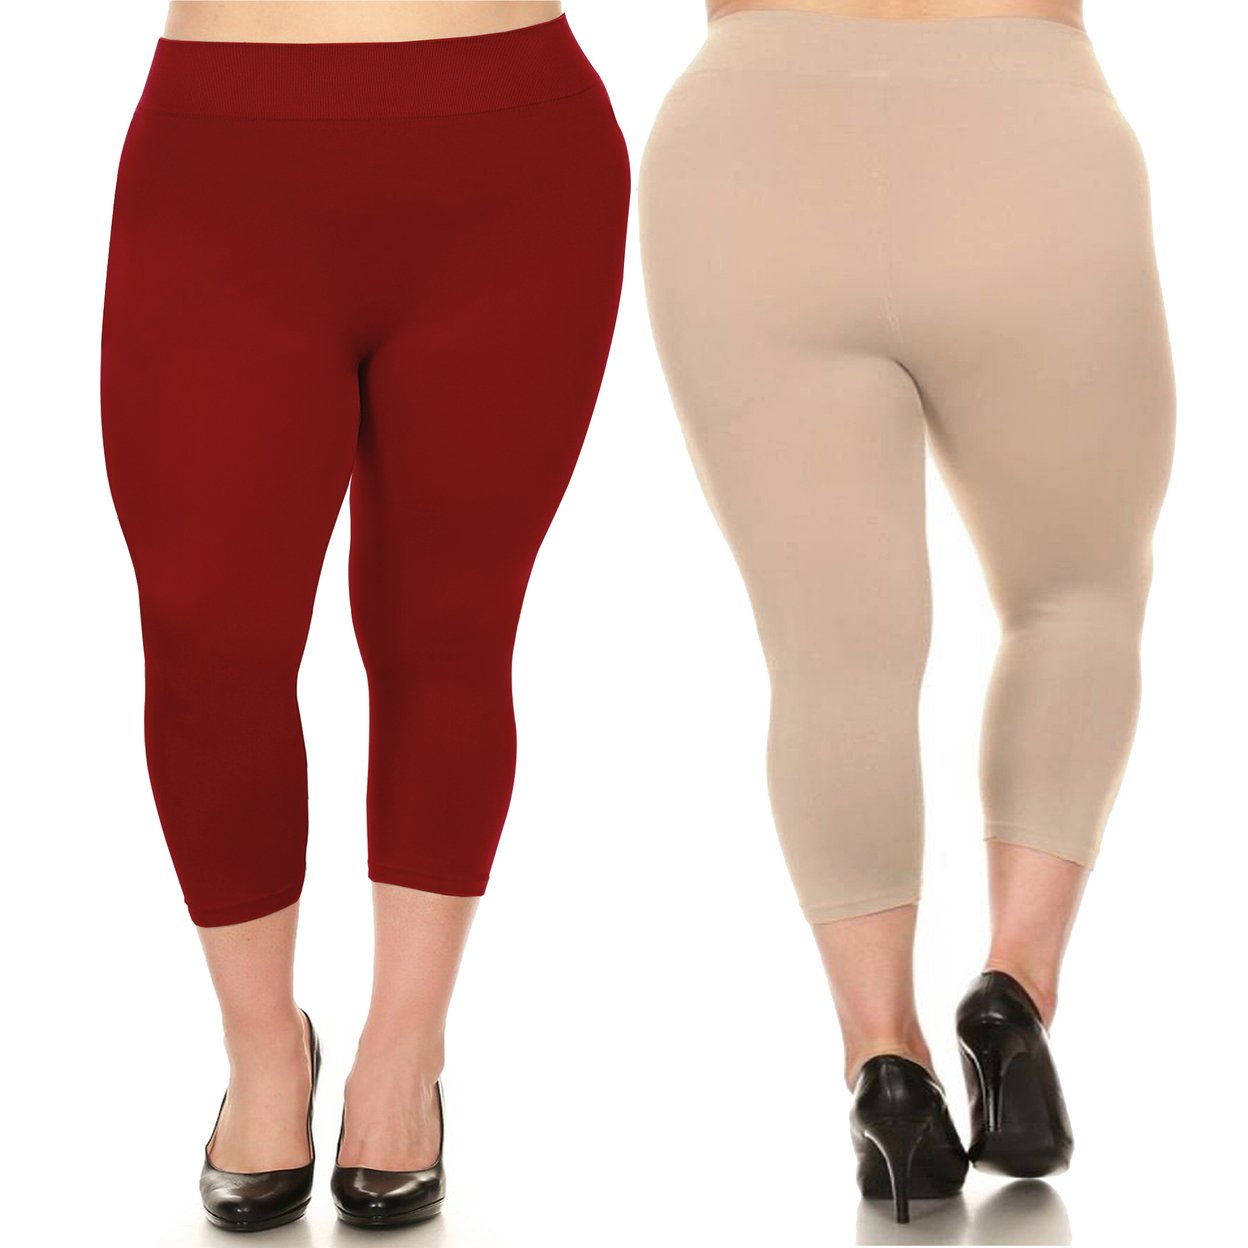 2-Pack: Women's Ultra-Soft High Waisted Smooth Stretch Active Yoga Capri Leggings Plus Size Available - Red & Red, 1x